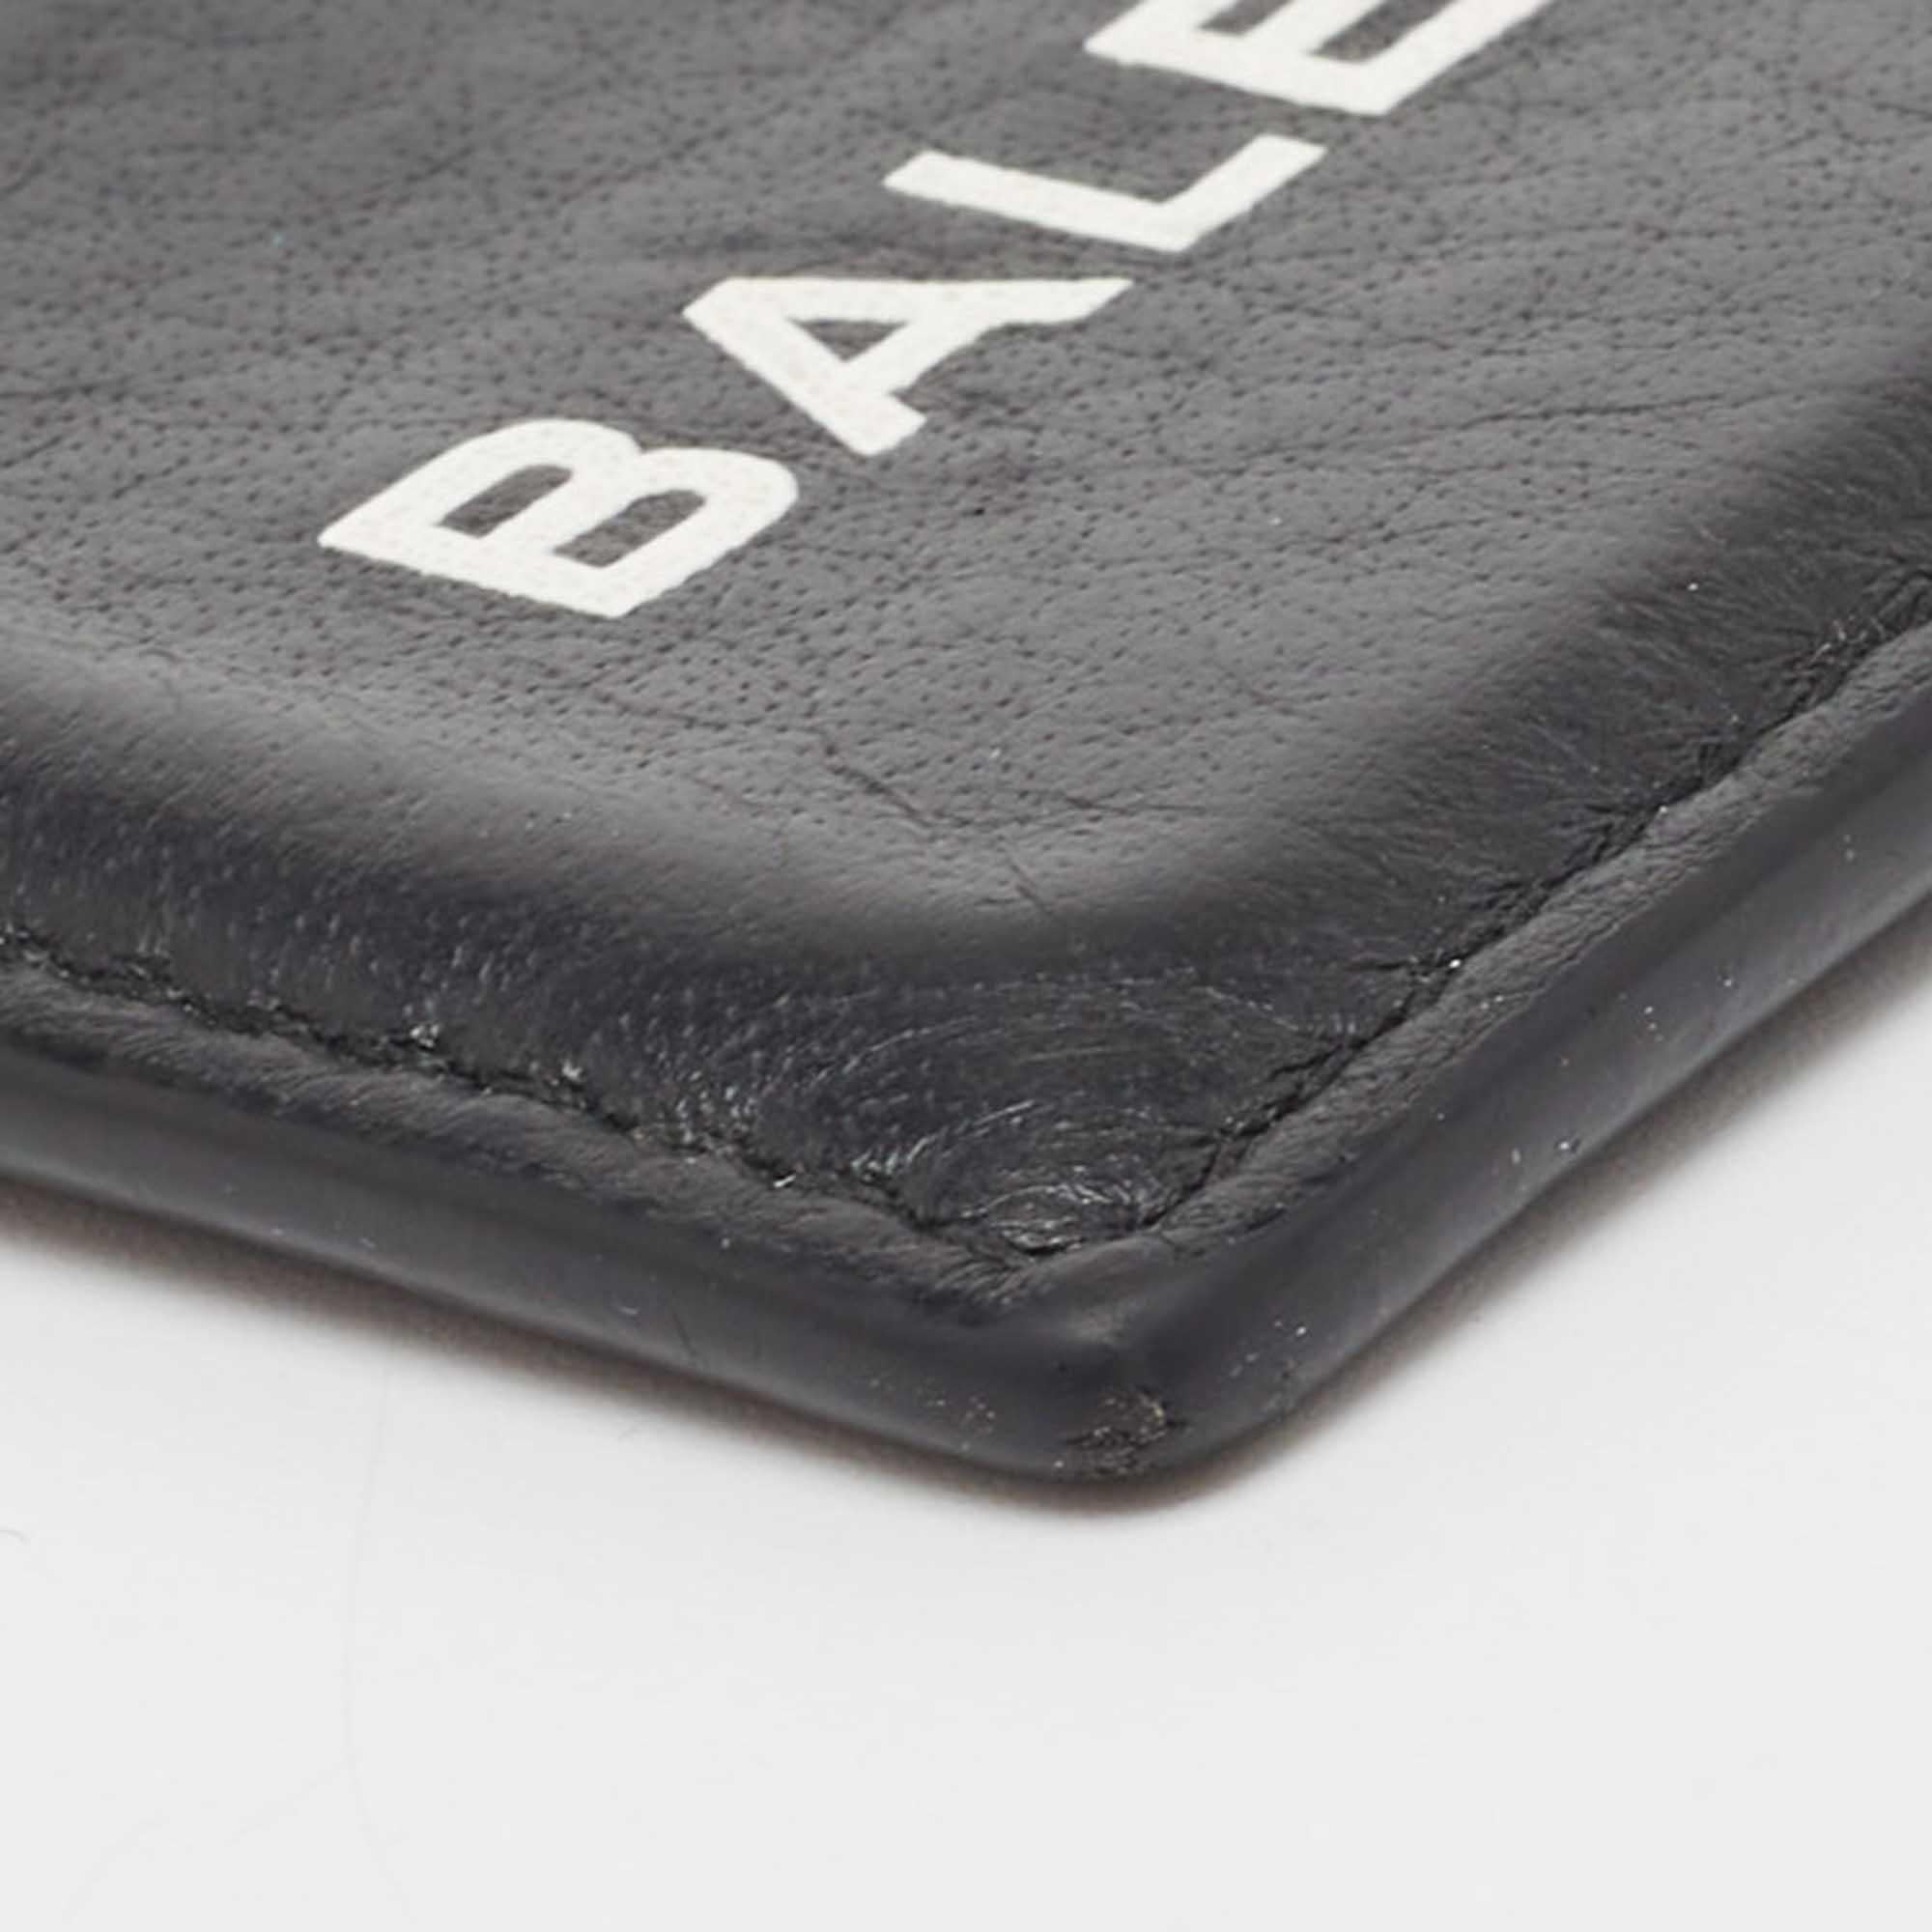 This Balenciaga black card holder made from leather is the perfect accessory to keep your cards in proper order. Its slots are lined with leather. Adorned with the brand's signature on the front, it is surely a must-have.

